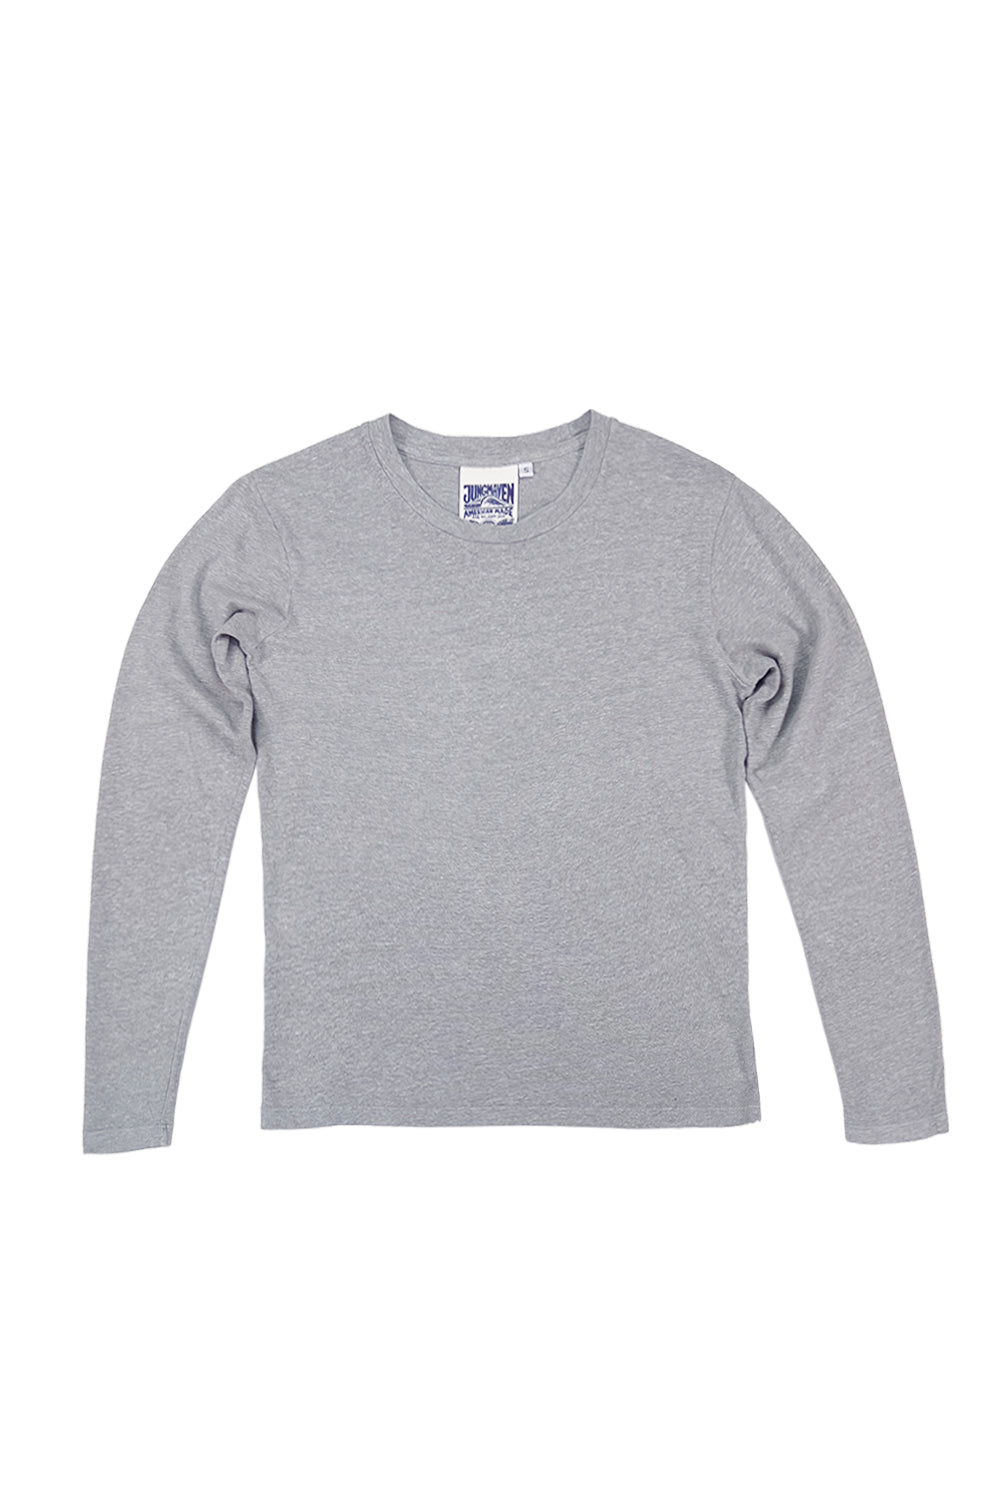 Heathered Encanto Long Sleeve Tee | Jungmaven Hemp Clothing & Accessories / Color: Athletic Gray